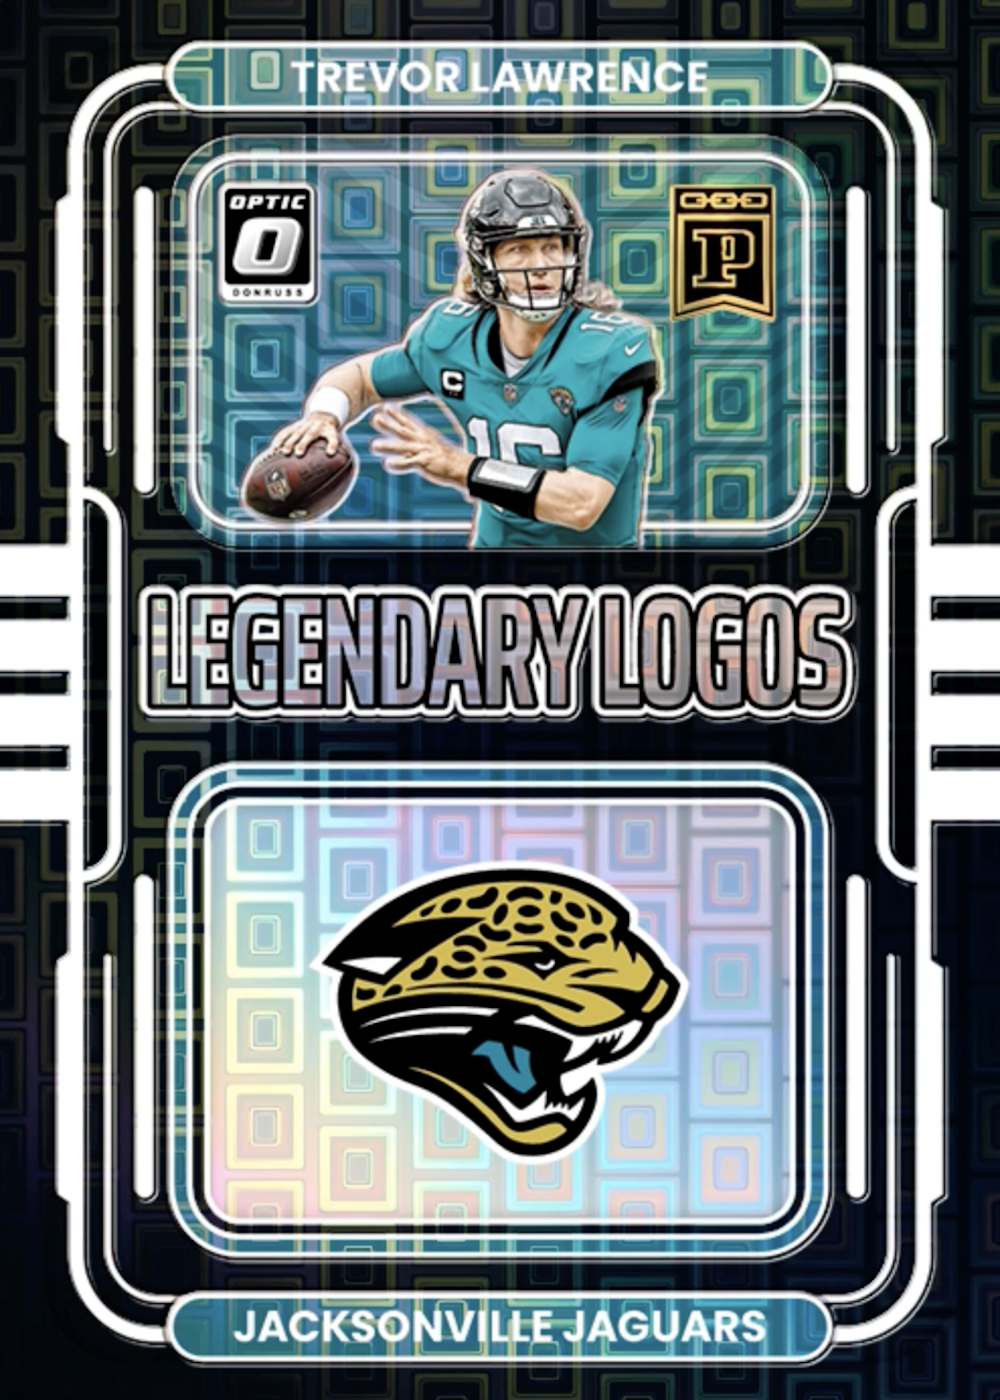 Jaguars, NFL To Offer 2021 Limited-Edition Digital Collectible Ticket NFTs